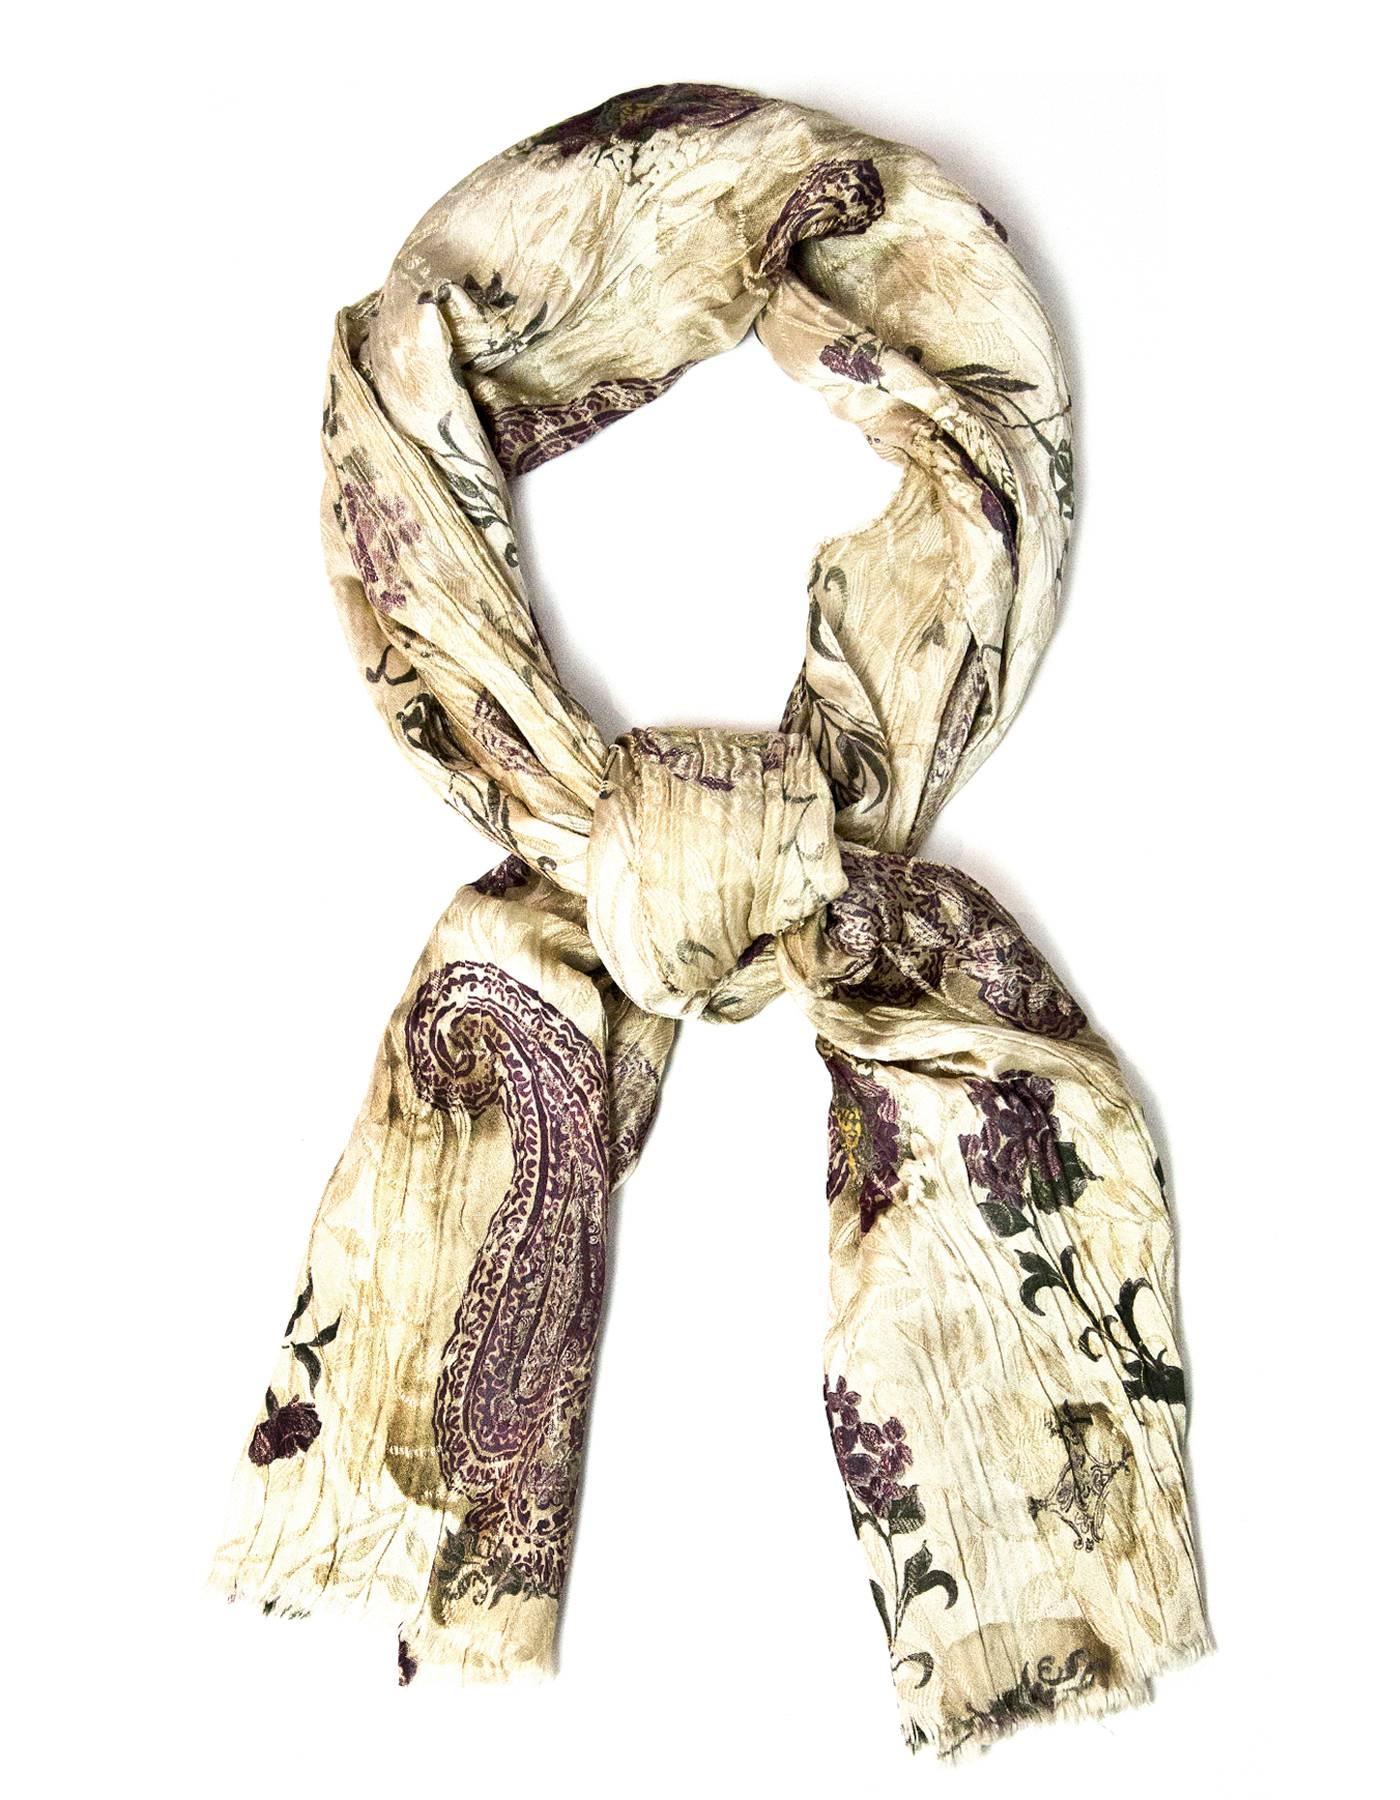 Etro Gold & Purple Metallic Scarf

Made In: Italy
Color: Gold, purple
Composition: 55% Silk, 45% Lurex
Overall Condition: Excellent pre-owned condition
Measurements:
Length: 76"
Width: 18"